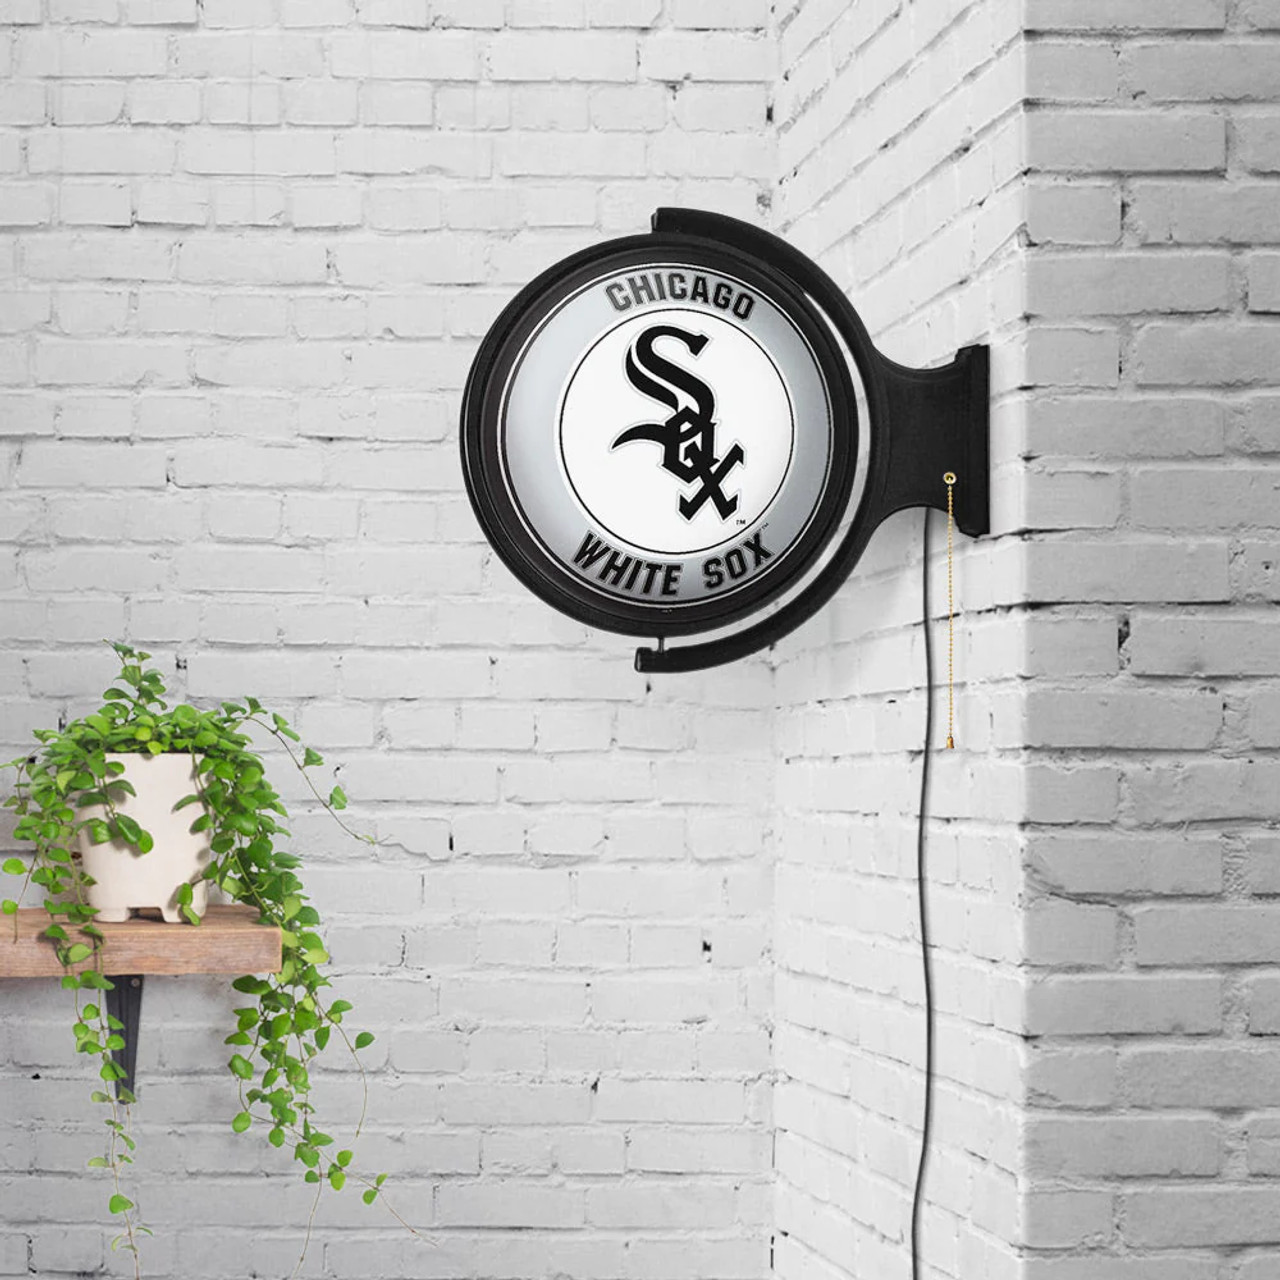 Chicago White Sox: Original Round Rotating Lighted Wall Sign